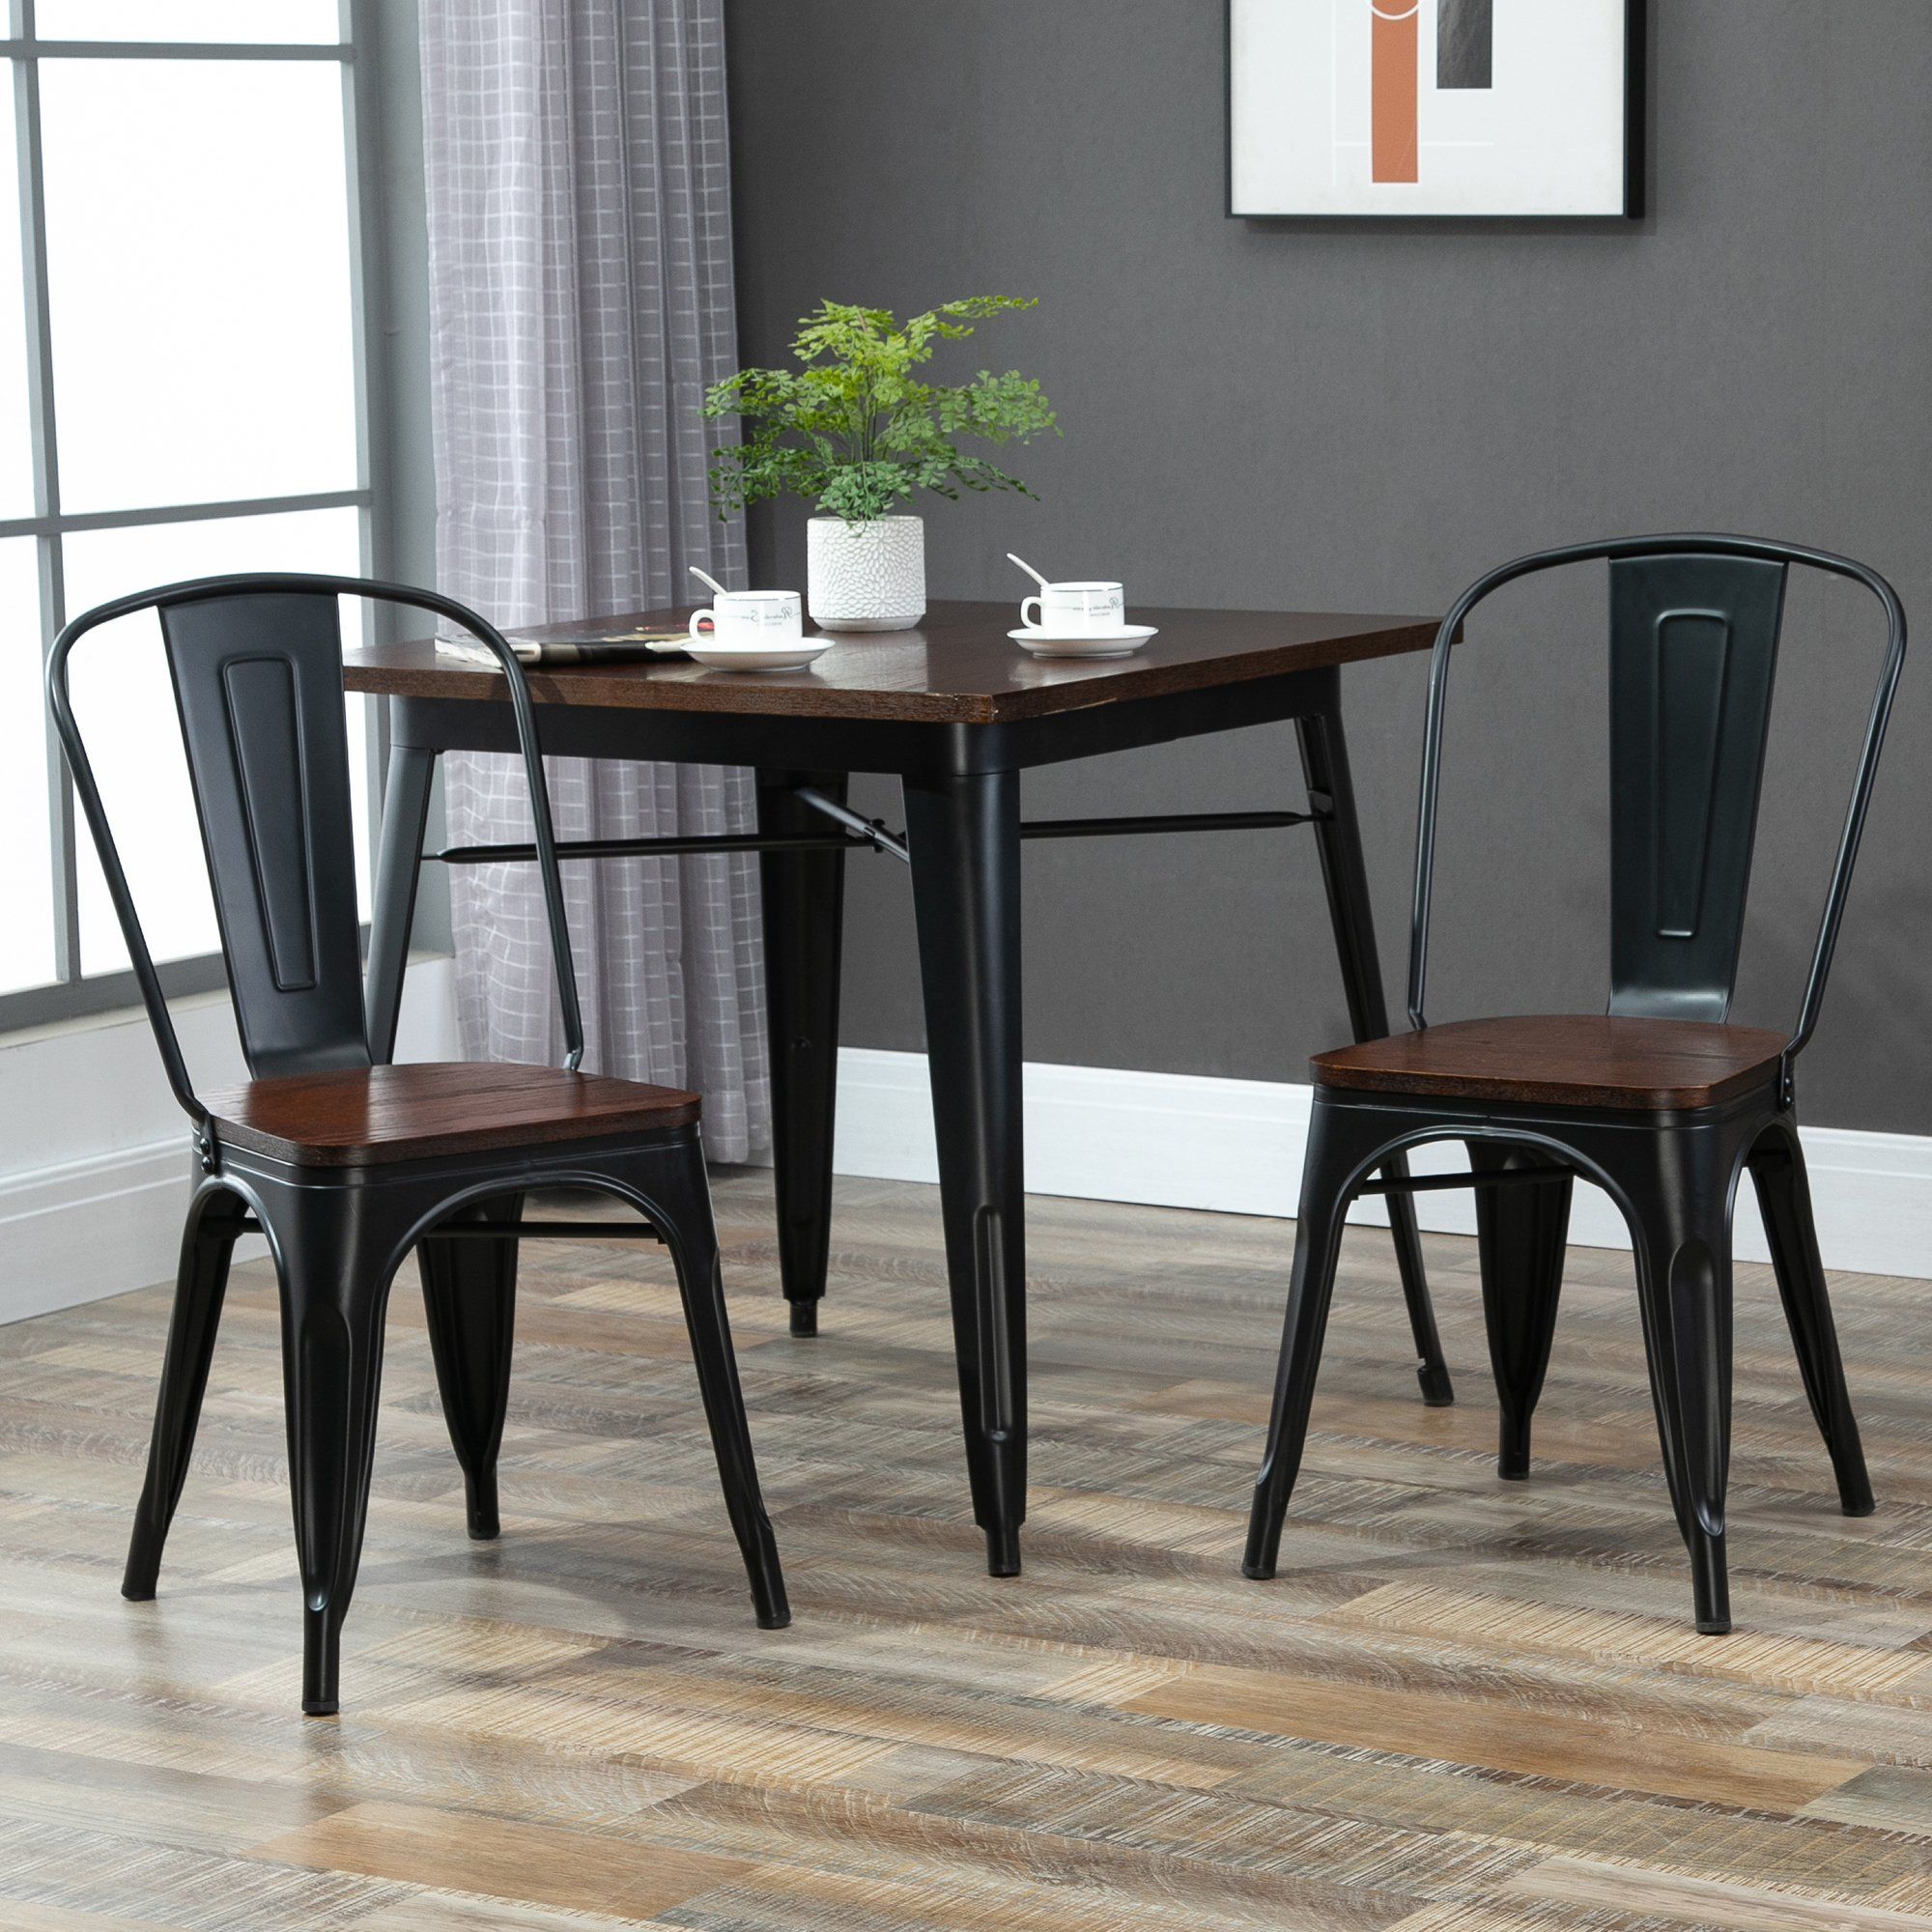 Wood Bistro Table And Chairs Sets Within Preferred Homcom 3 Piece Industrial Style Dining Table Chair Set Square Desk High (View 1 of 15)